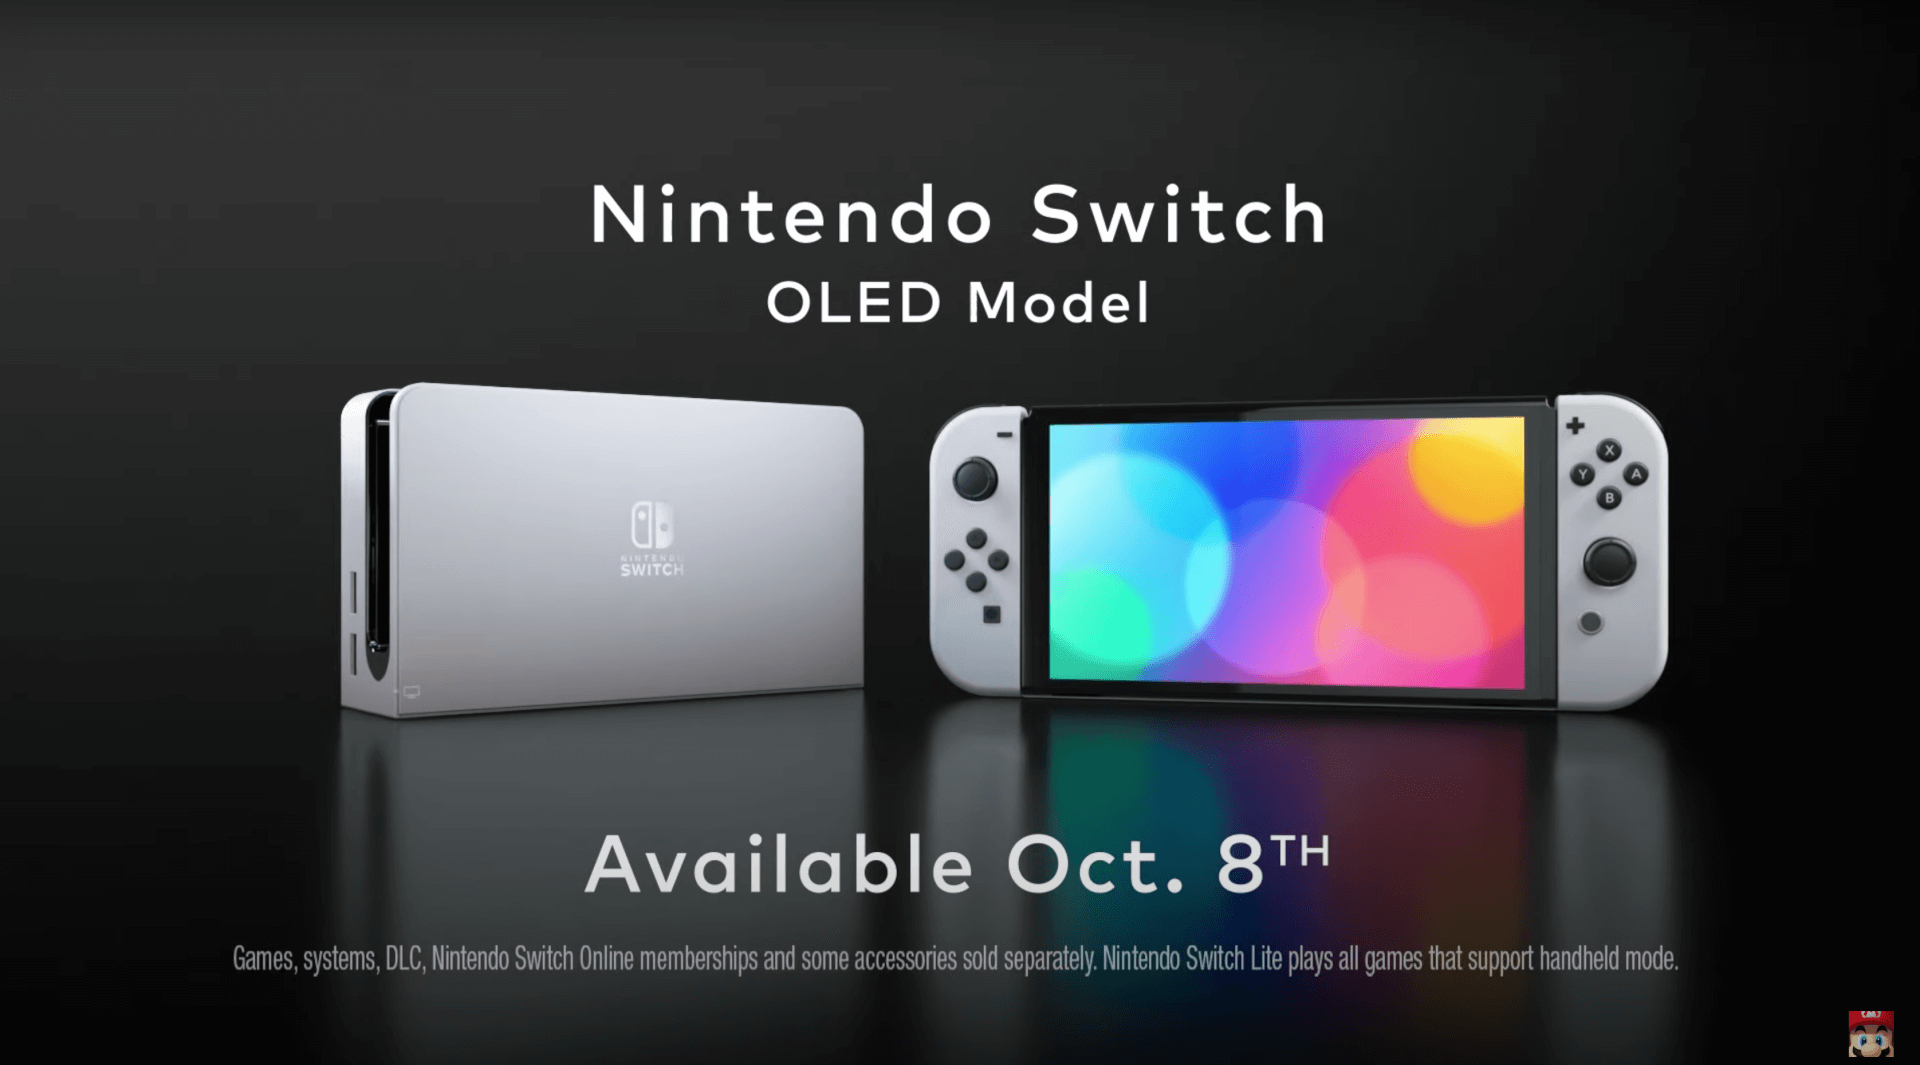 Springboard Sæbe Depression Nintendo Switch OLED Seems More Like a Minor Upgrade Than A Necessary Shift